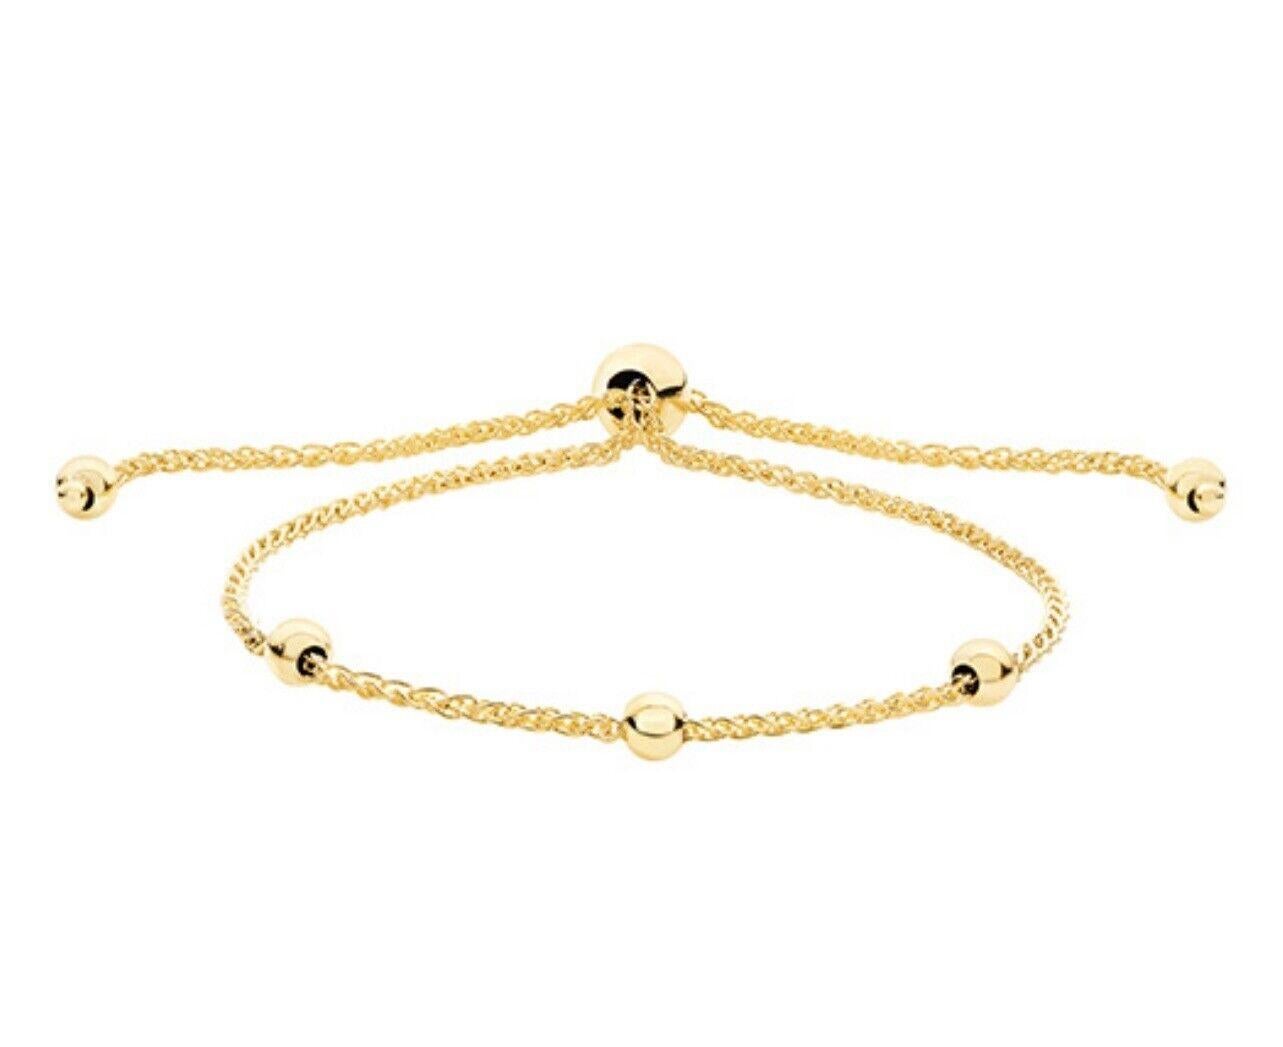 9ct Yellow Gold Chain Beaded Bracelet adjustable toggle friendship 3g In New Condition For Sale In Ilford, GB